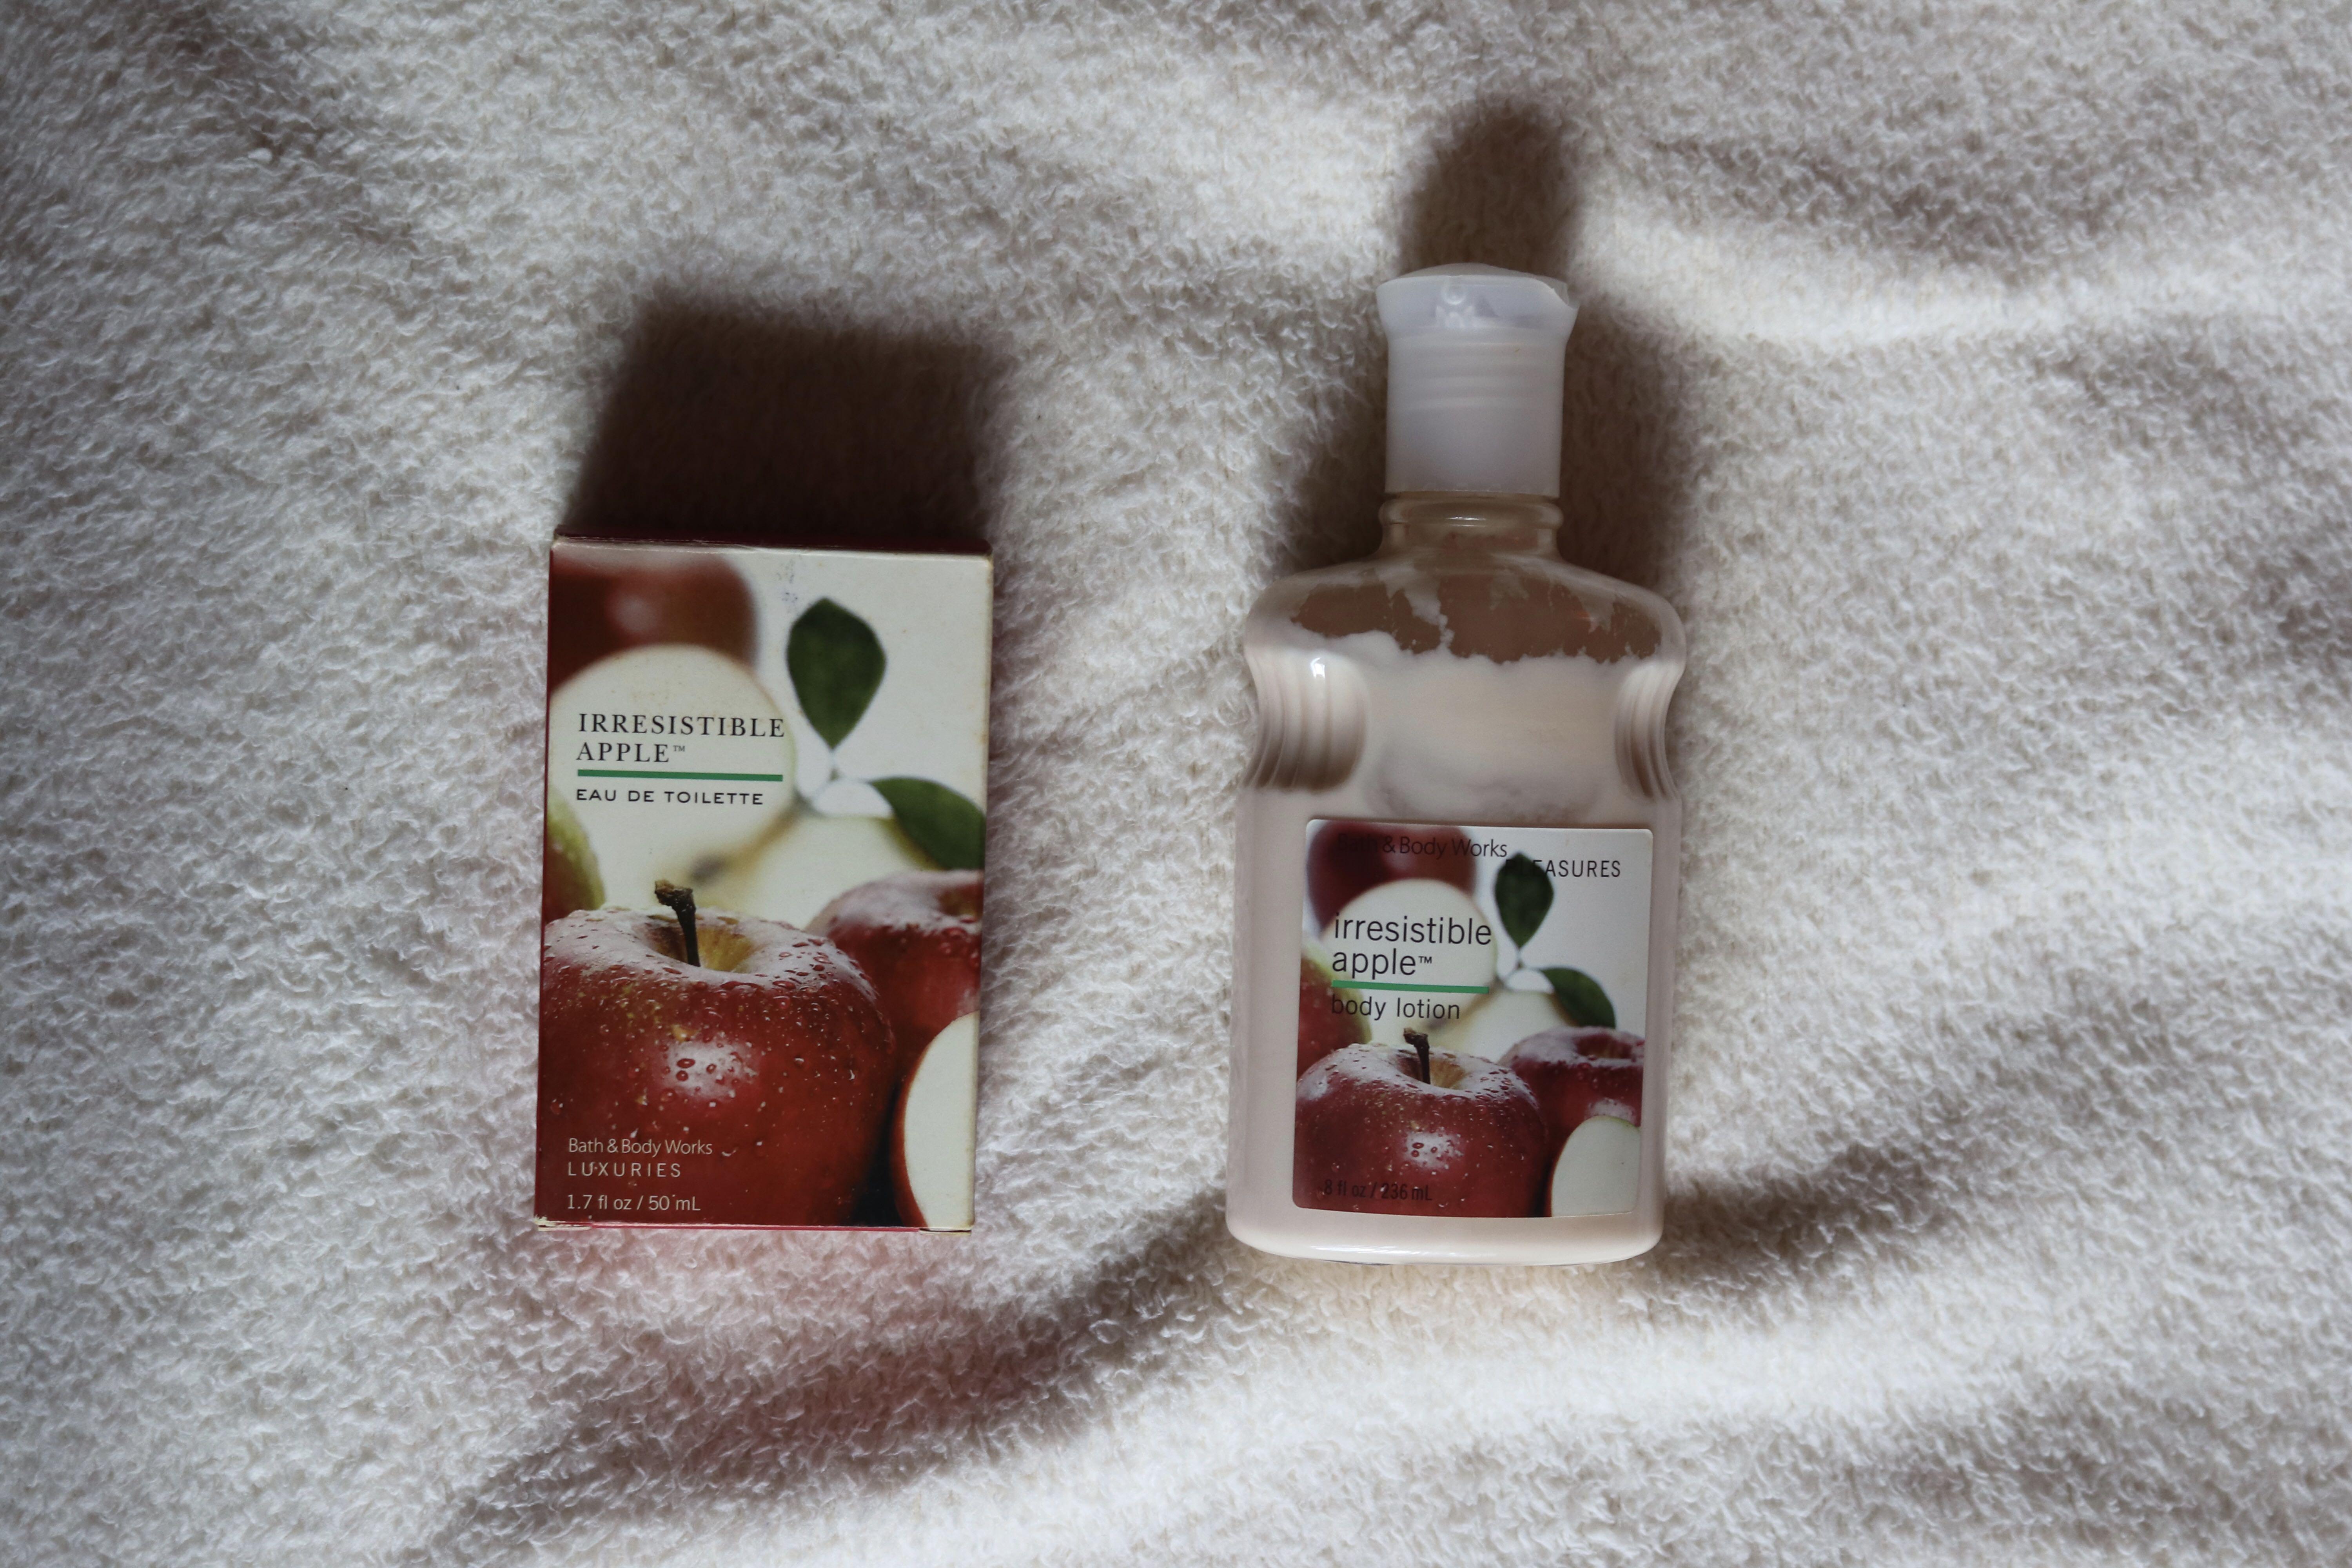 irresistible apple bath and body works